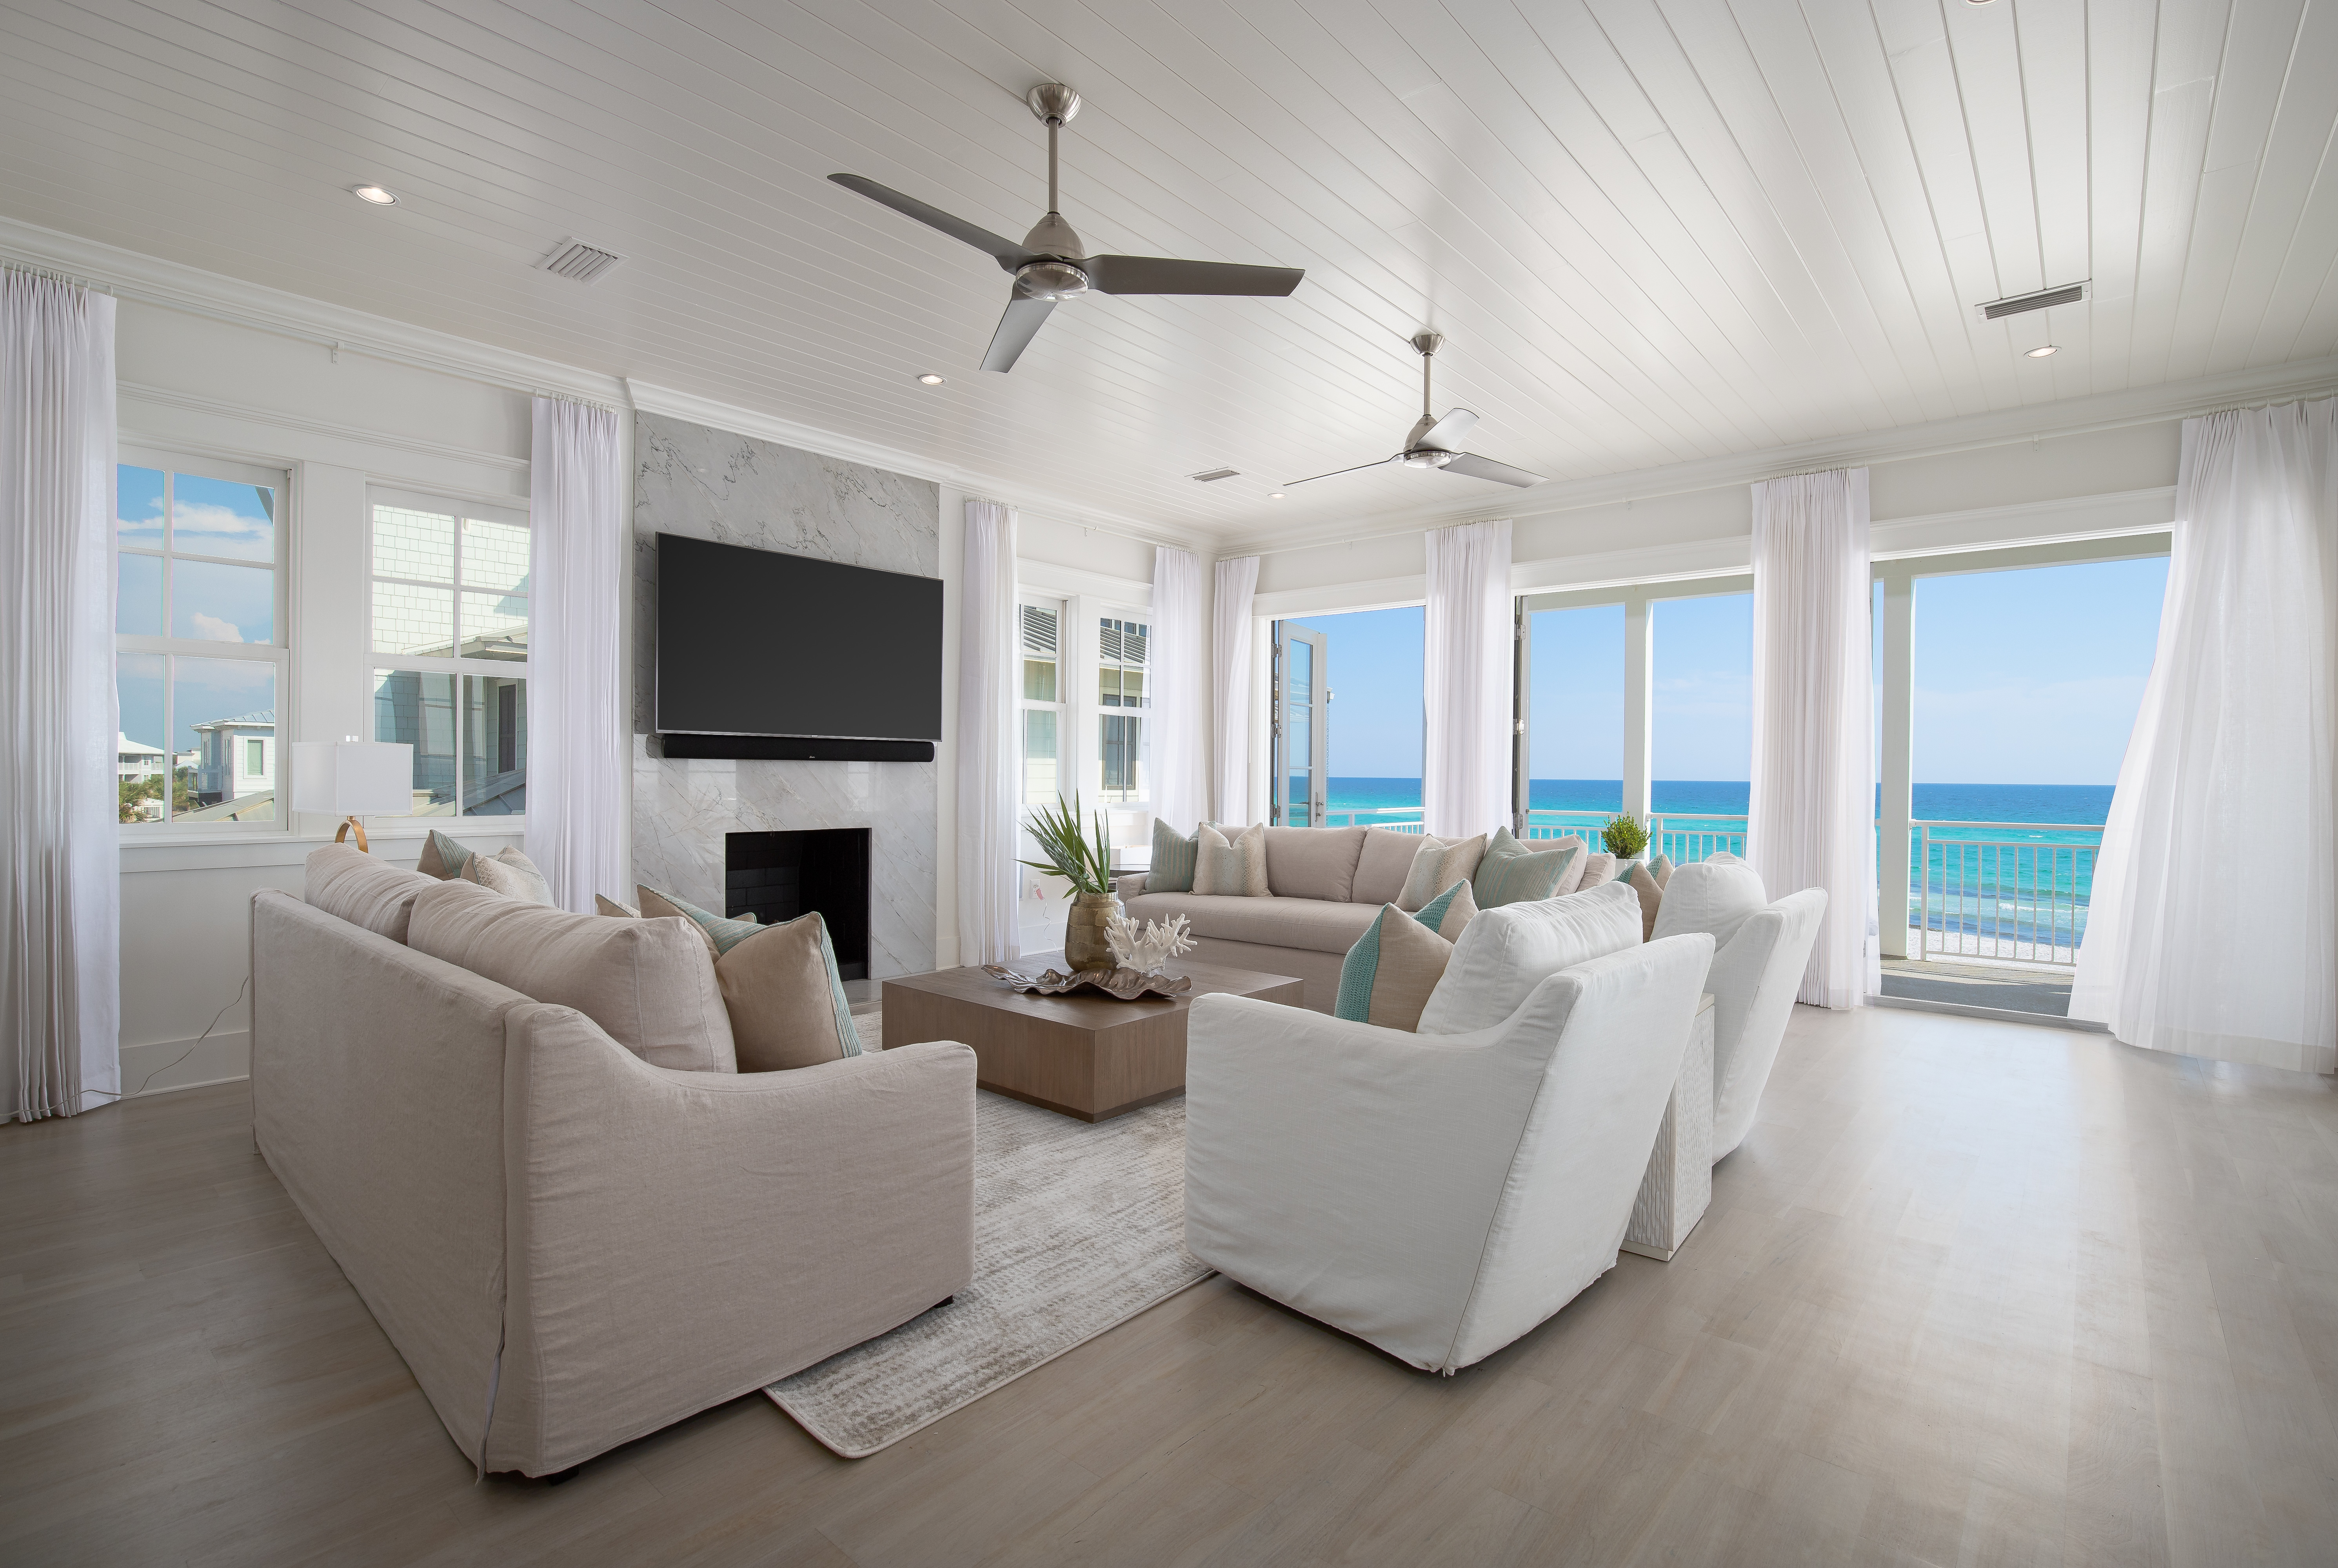 The living room of a gulf front home in Seagrove Beach with direct views of the water from every window